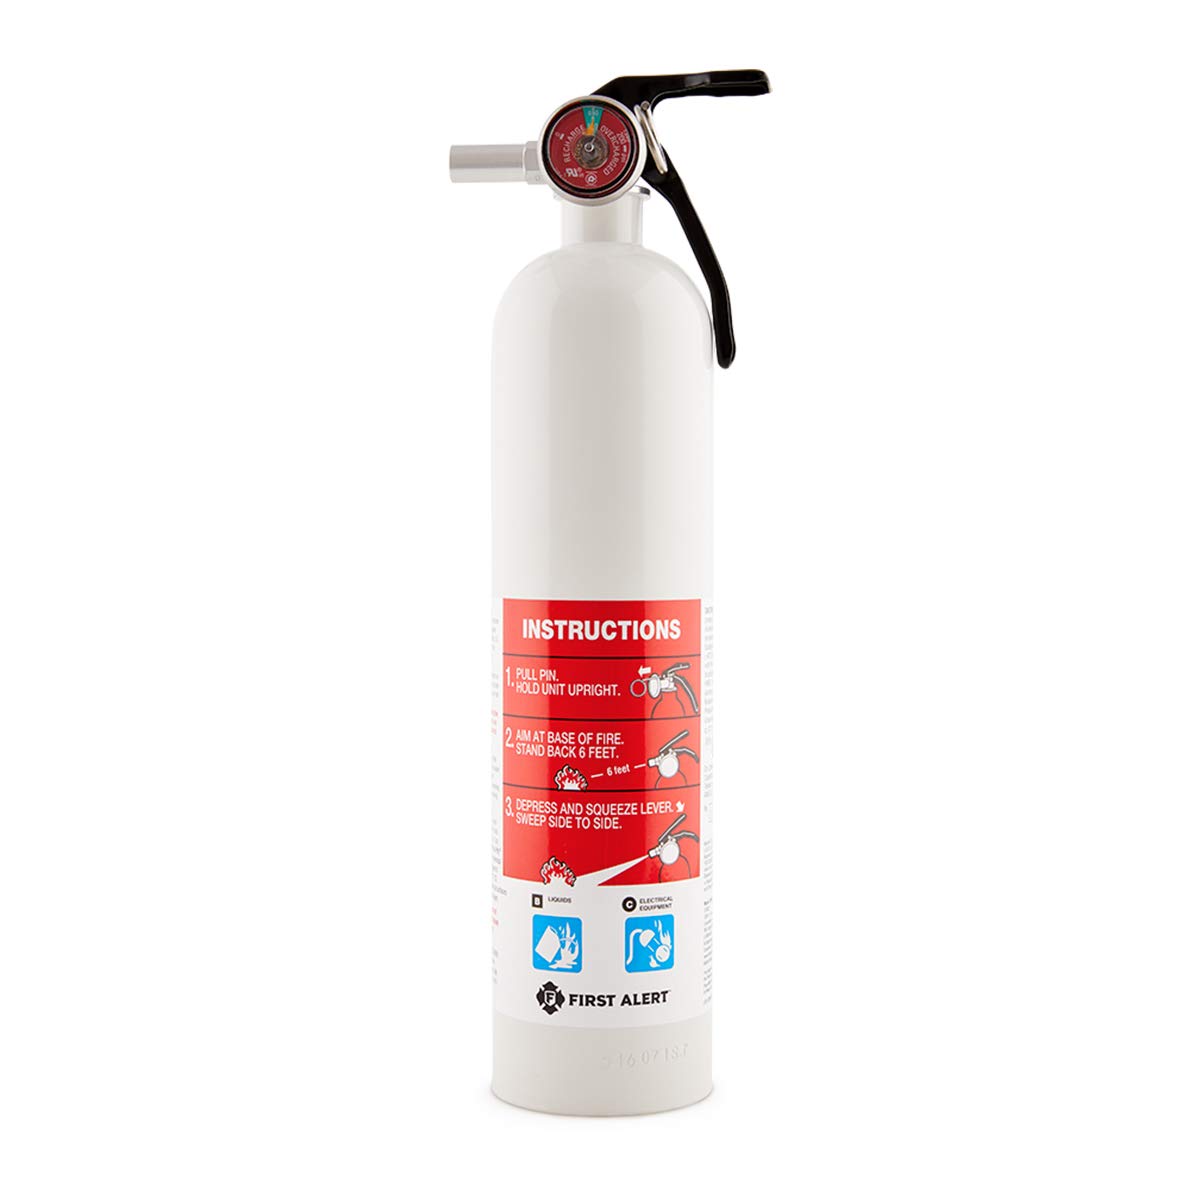 FIRST ALERT AUTOMAR10 Car and Marine Fire Extinguisher, FE10GR, UL RATED 10-B:C, White, 1-Pack